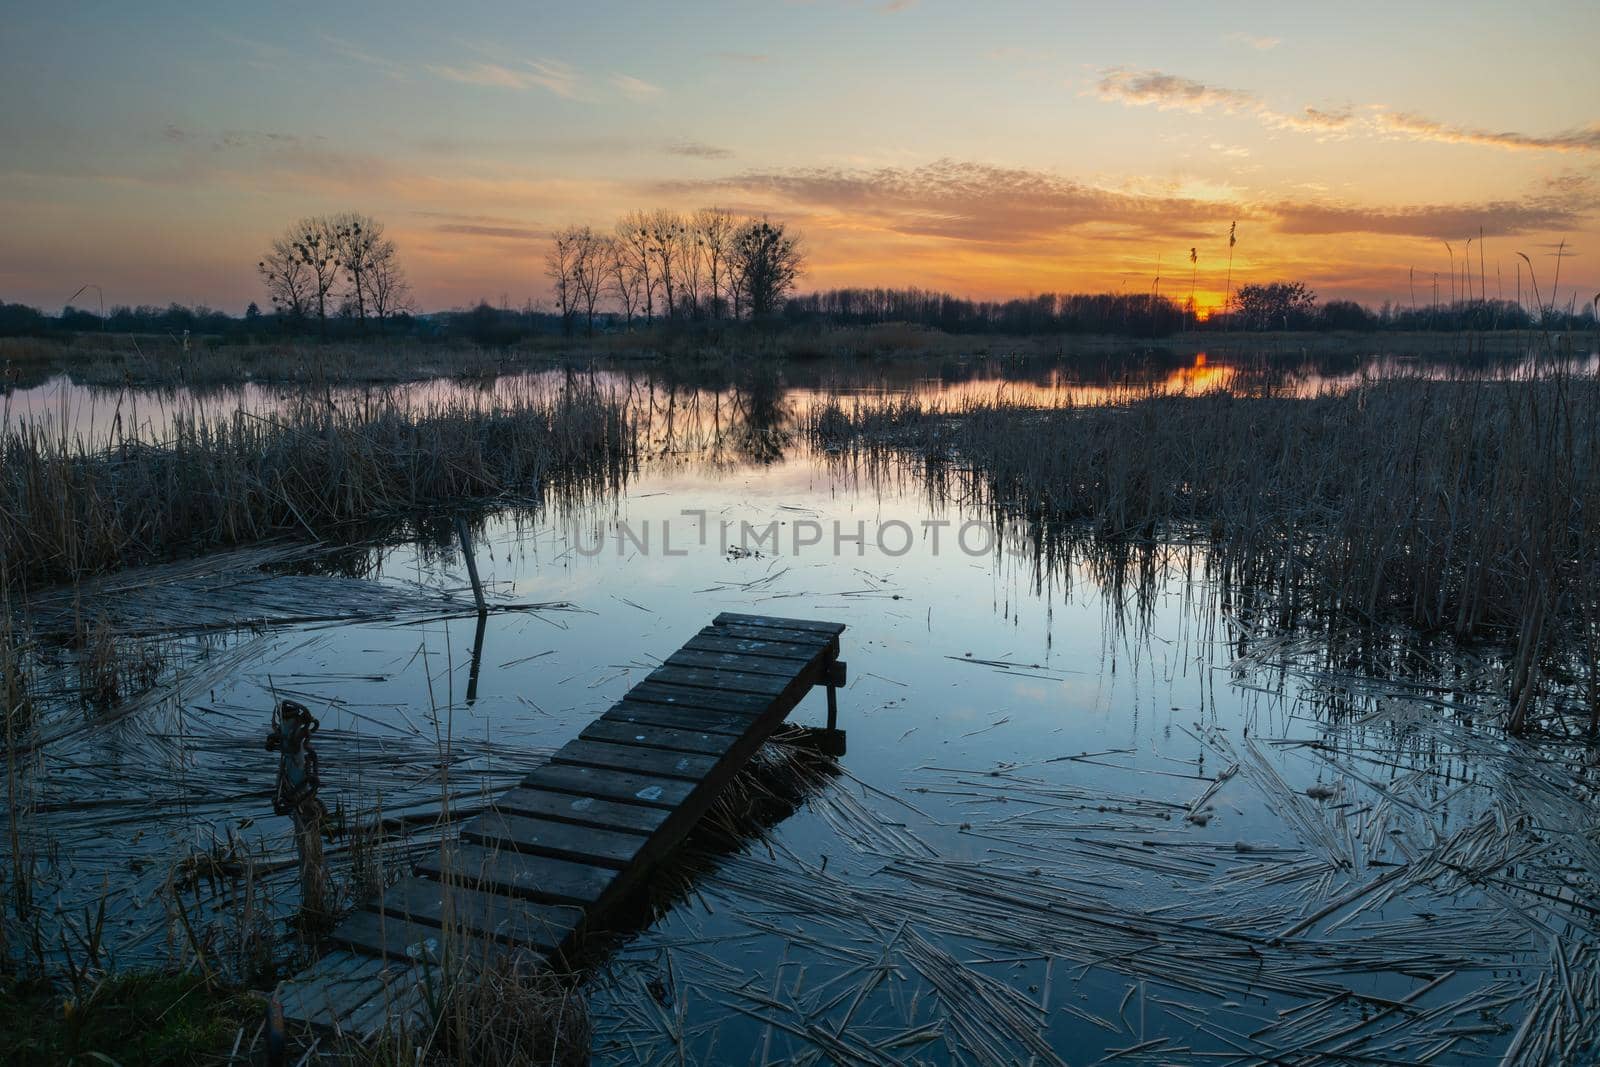 Footbridge on the shore of the calm lake and sunset view